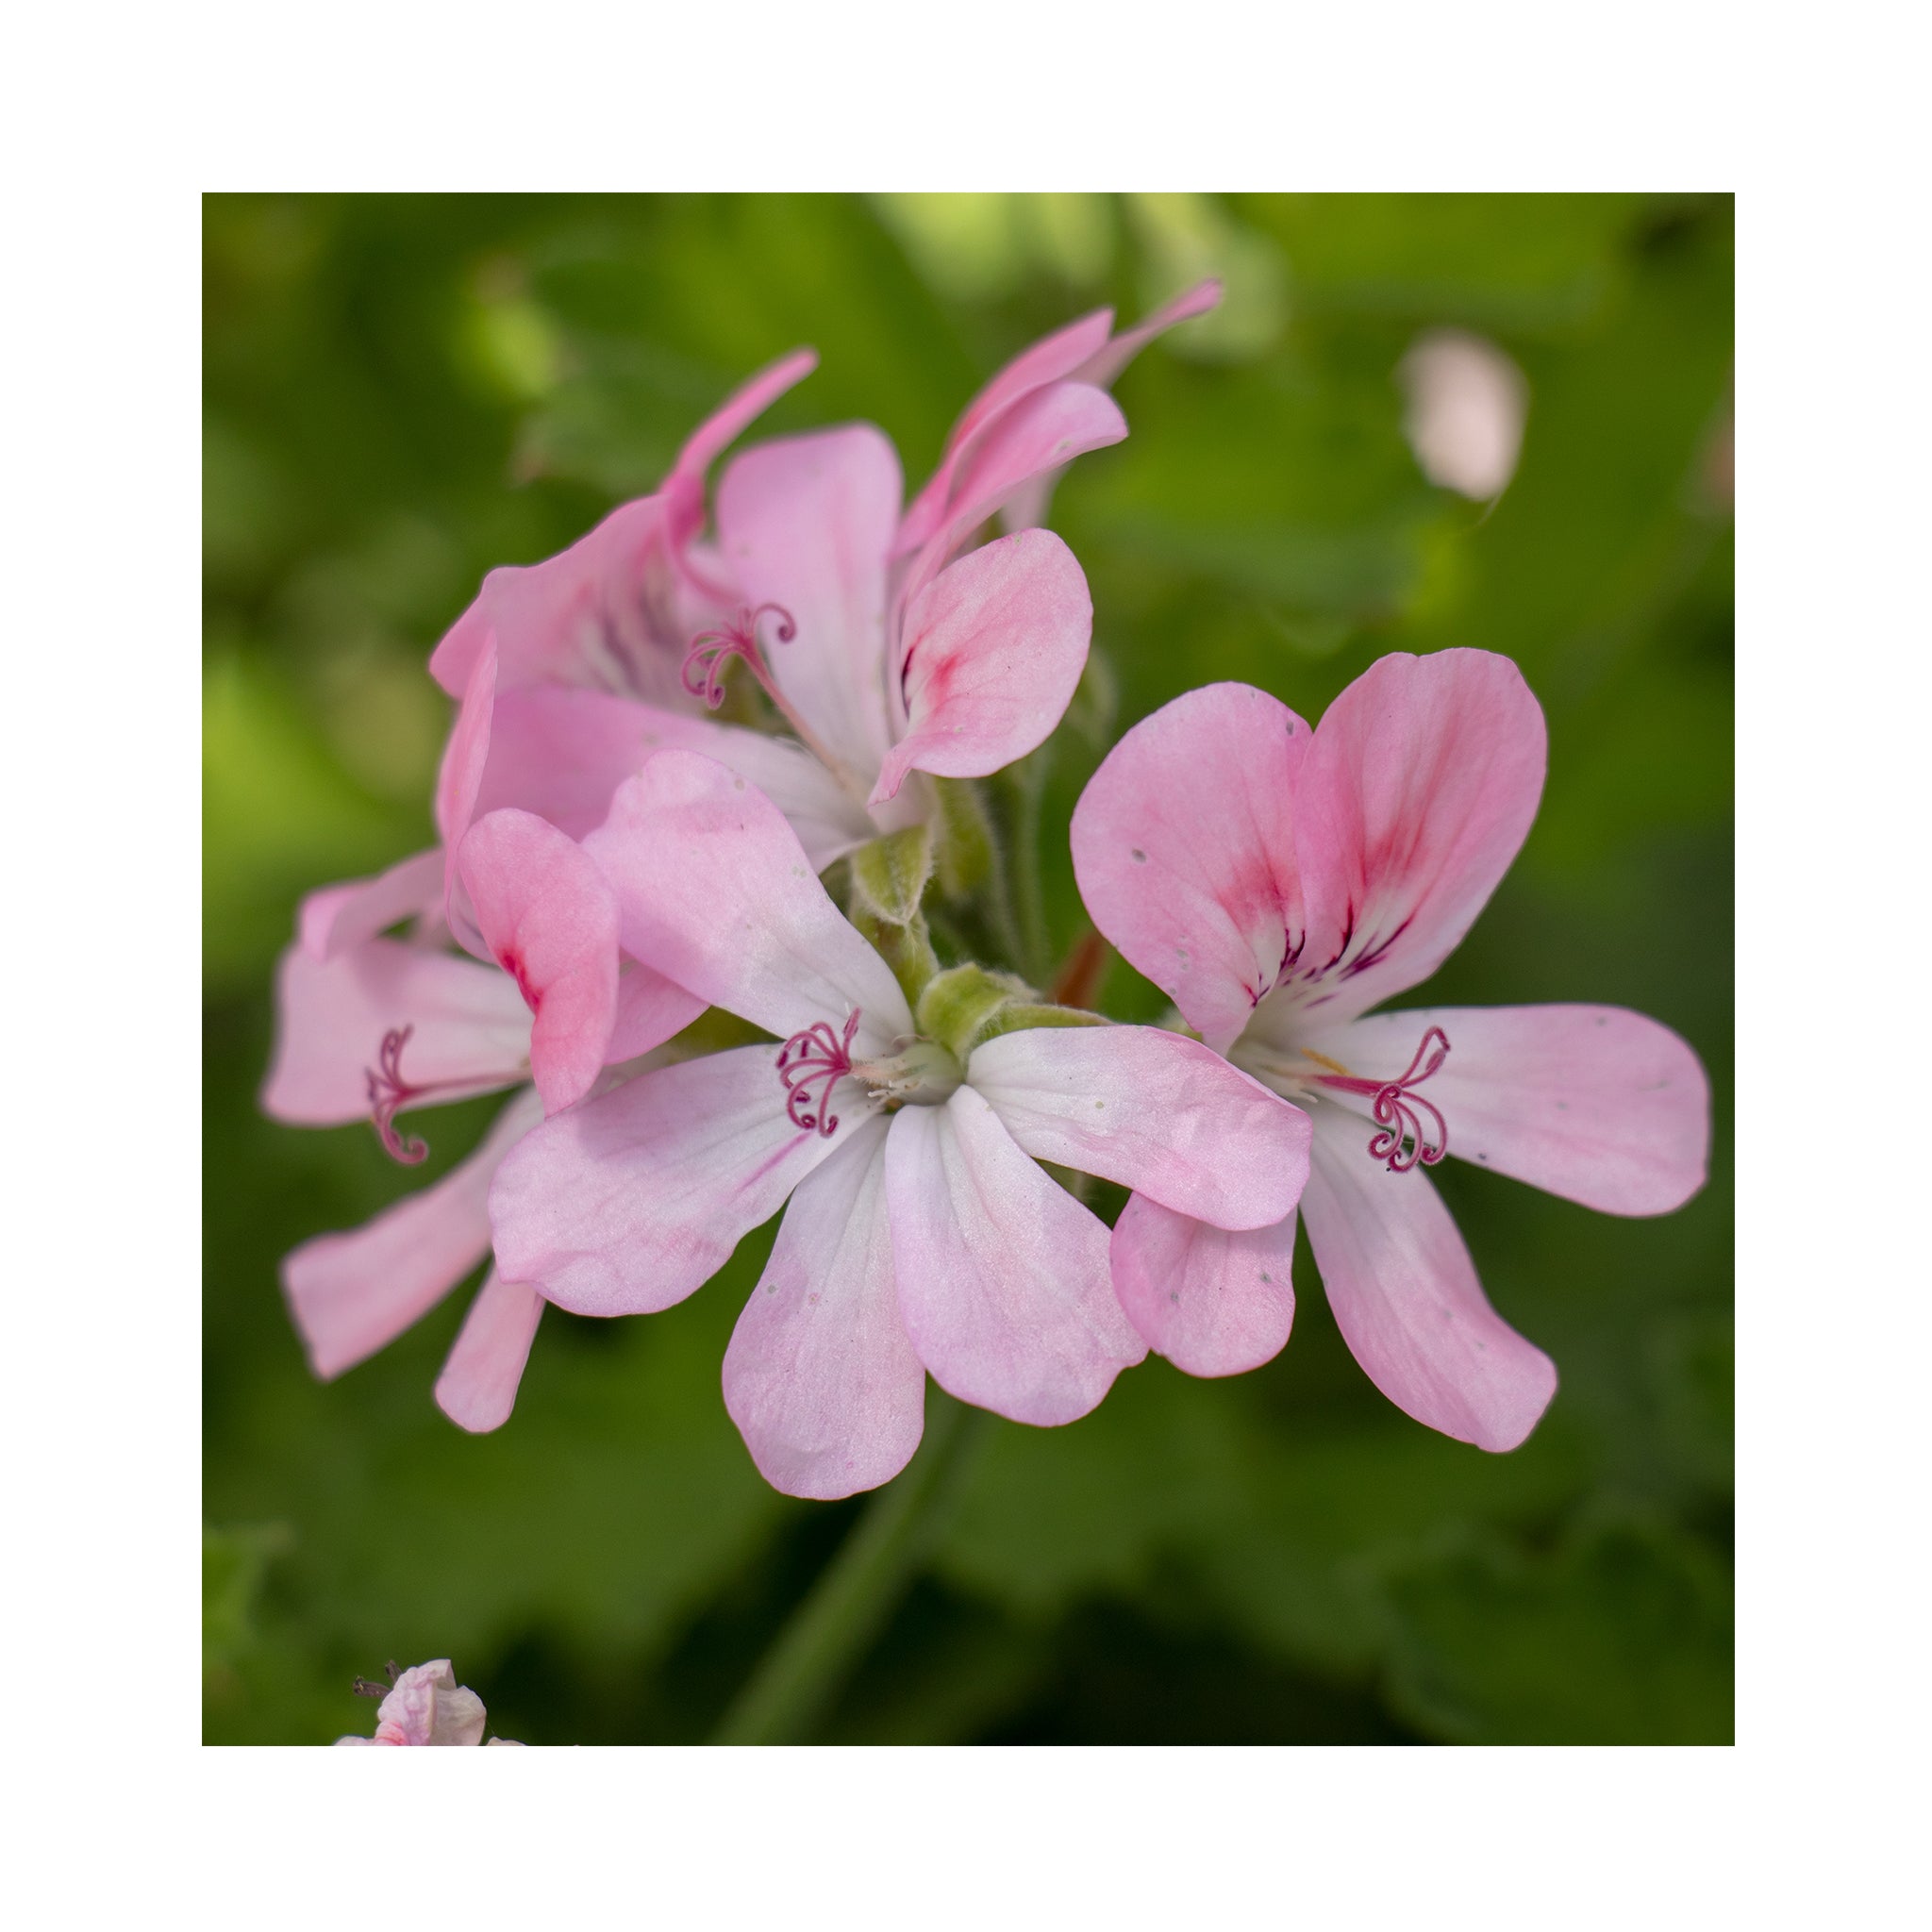 Scented Geranium, 6 mixed starter plants - Stunning Flowers with Scented Foliage